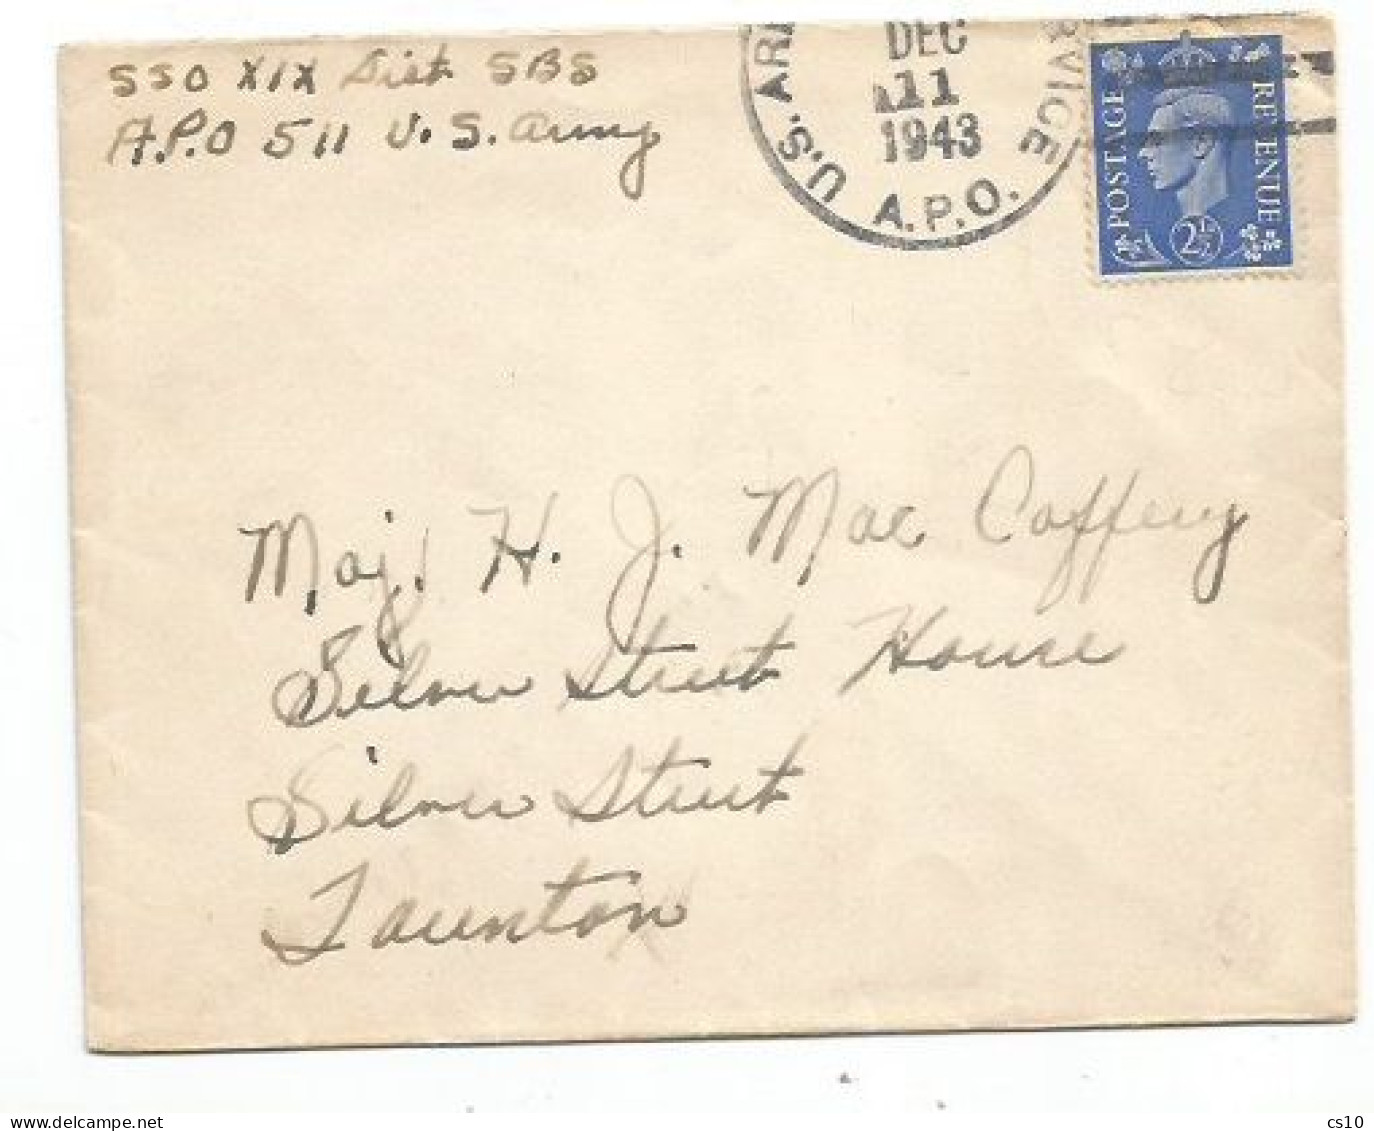 UK Britain KG6 2d5 Solo Franking CV APO US Army #511 On 11dec1943 To Launton UK - Postmark Collection